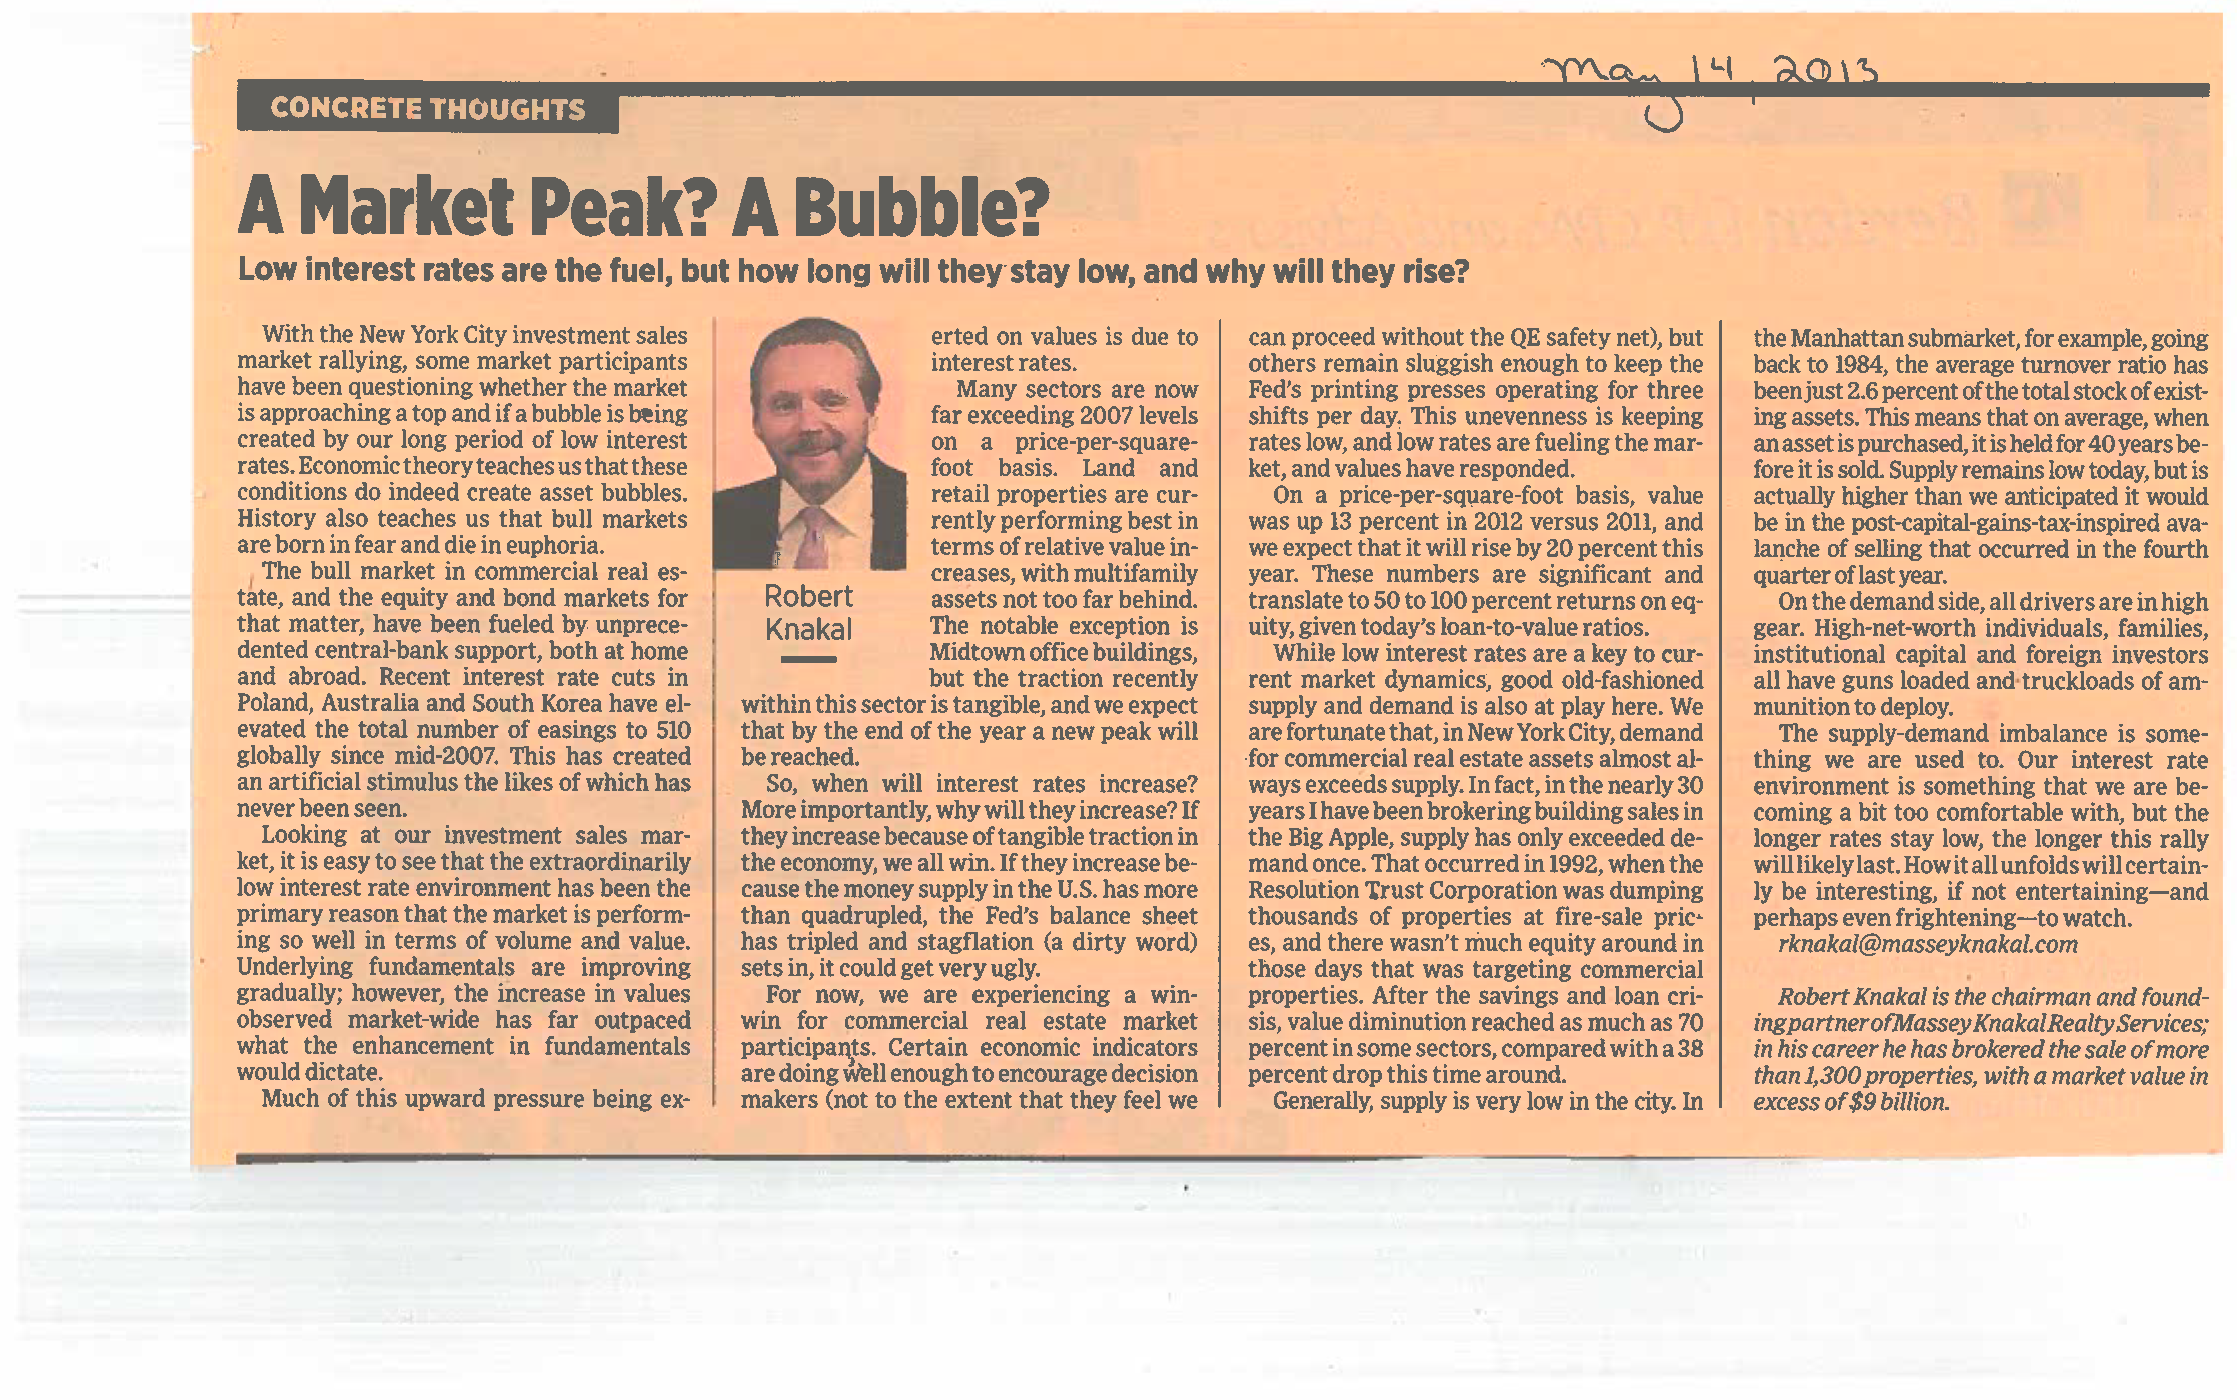 Concrete Thoughts - A Market Peak A Bubble - May 14 2013